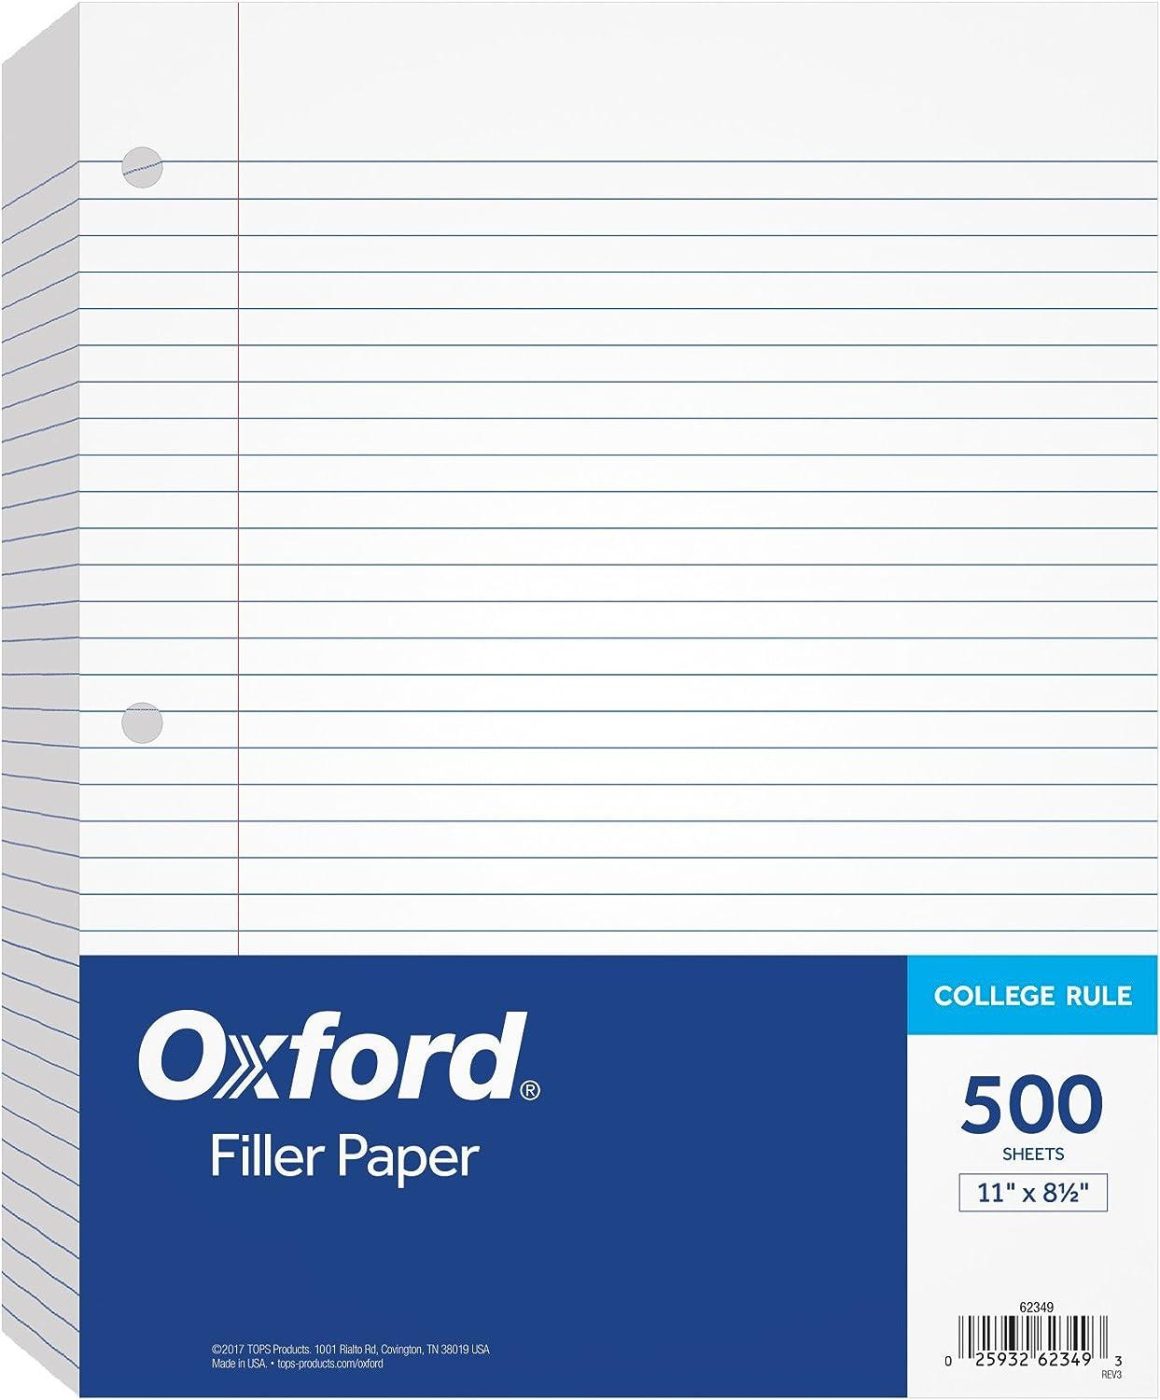 Notebook Paper from Oxford